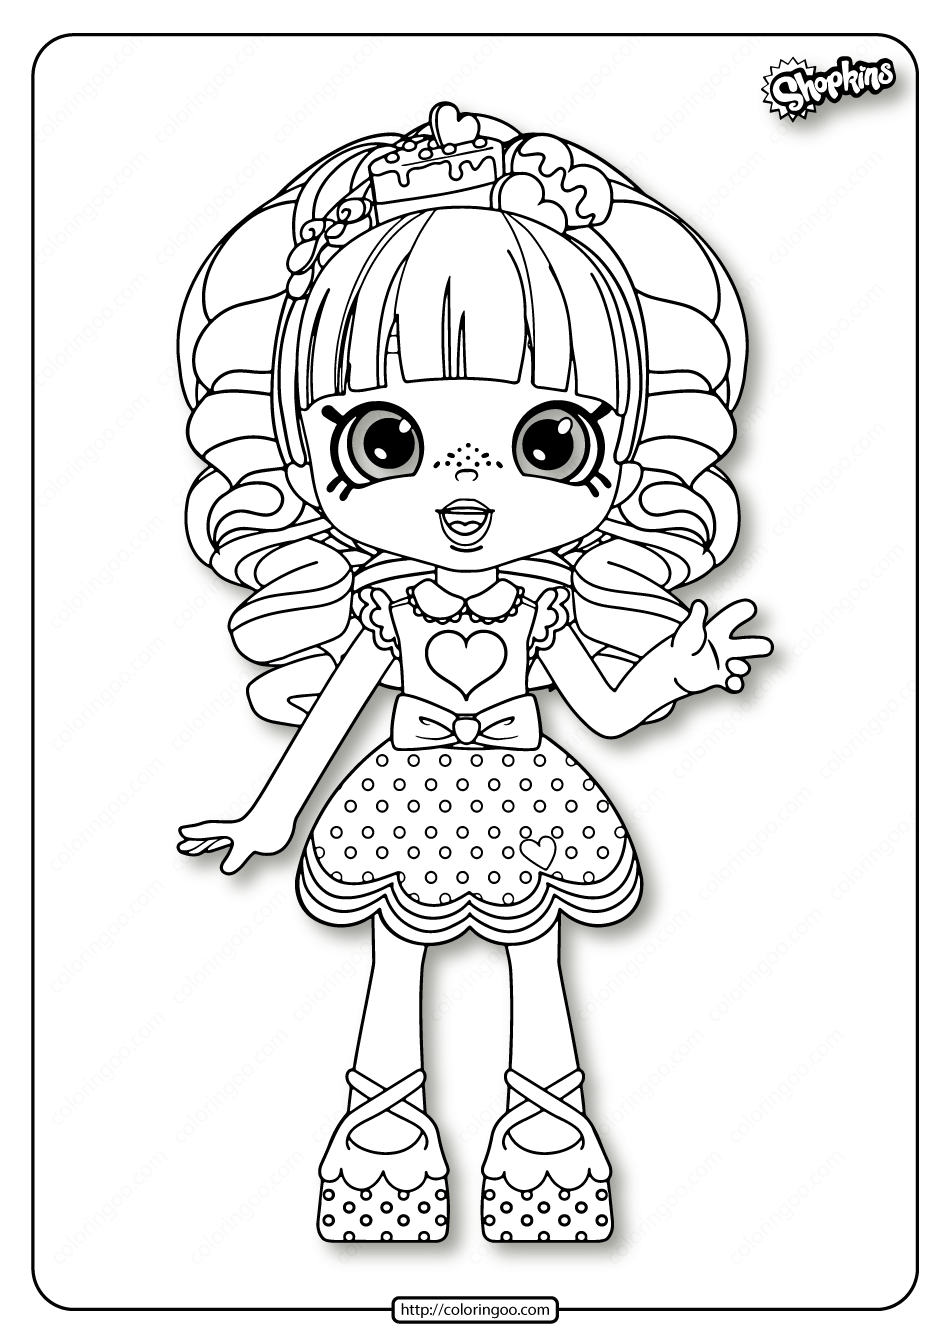 shopkins rainbow kate coloring pages